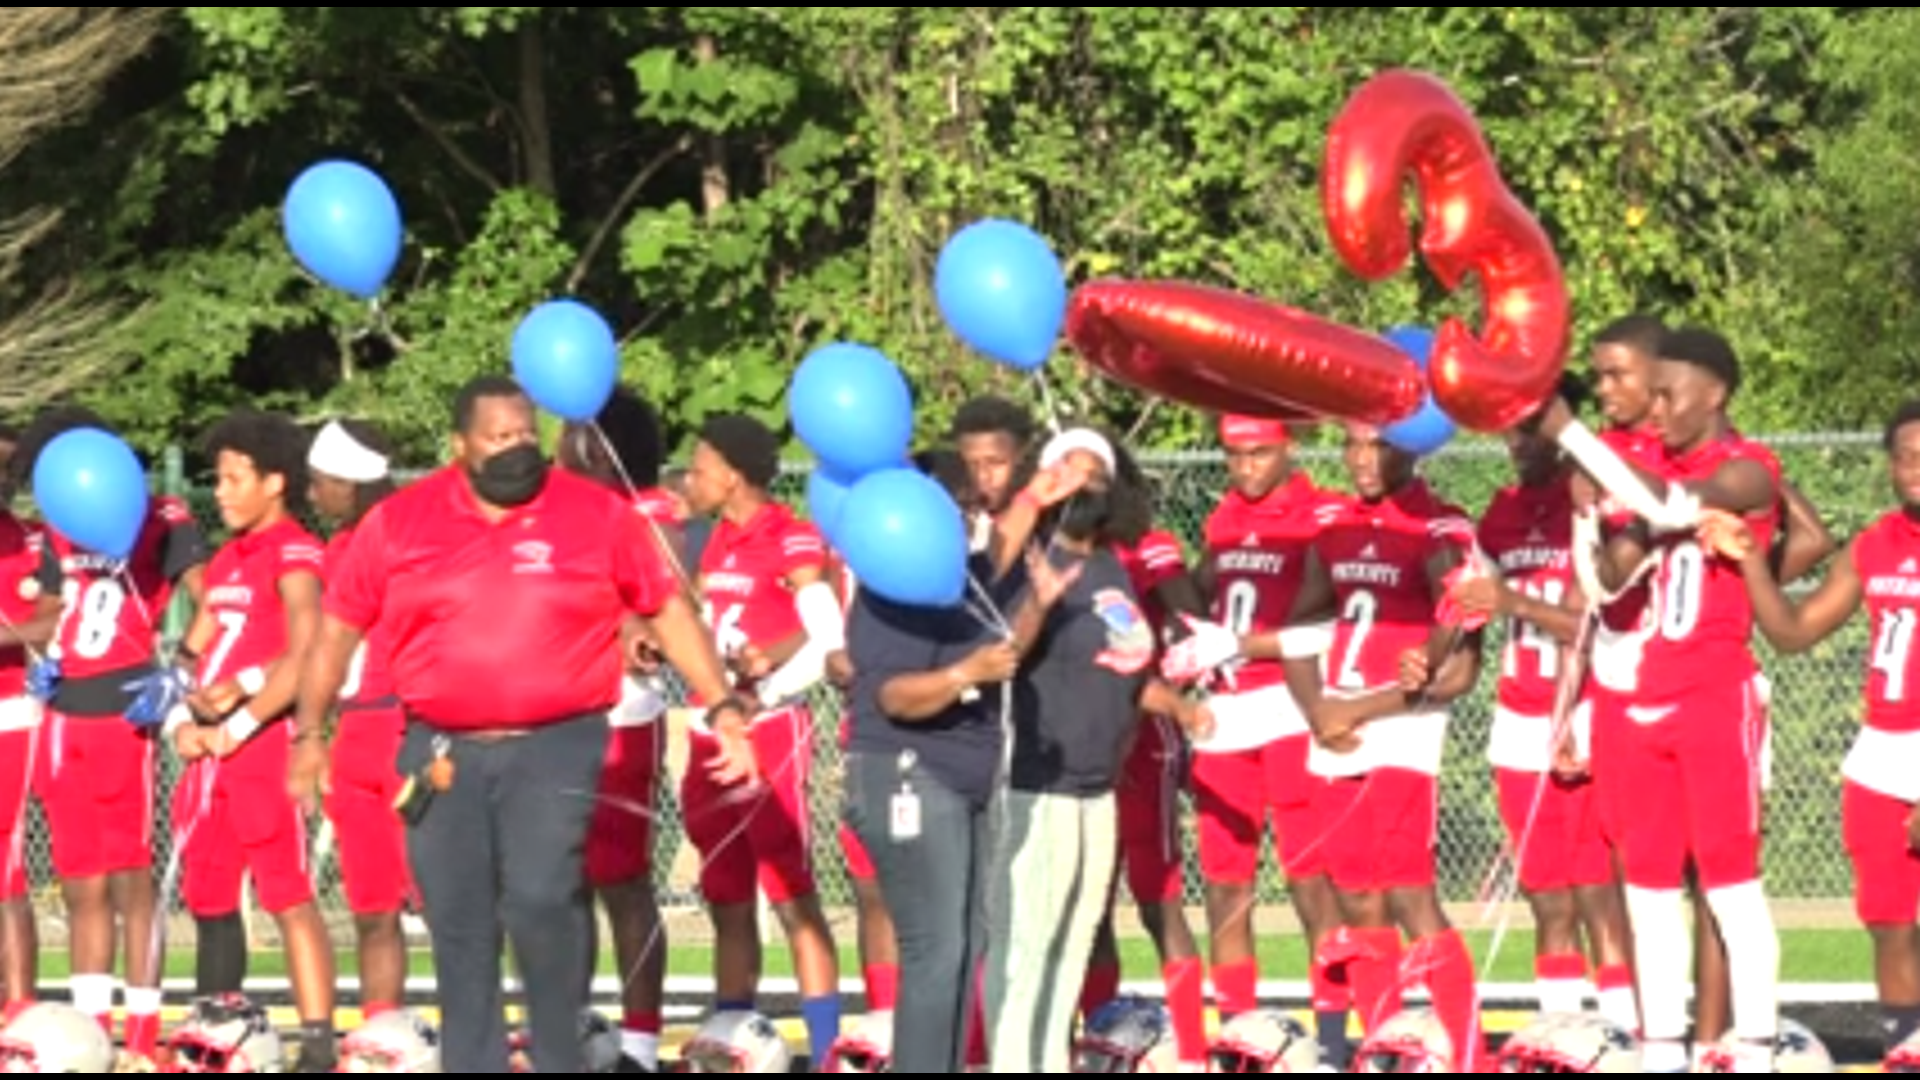 As the high school football season continues, one team found a chance to honor a player who died before the school year.